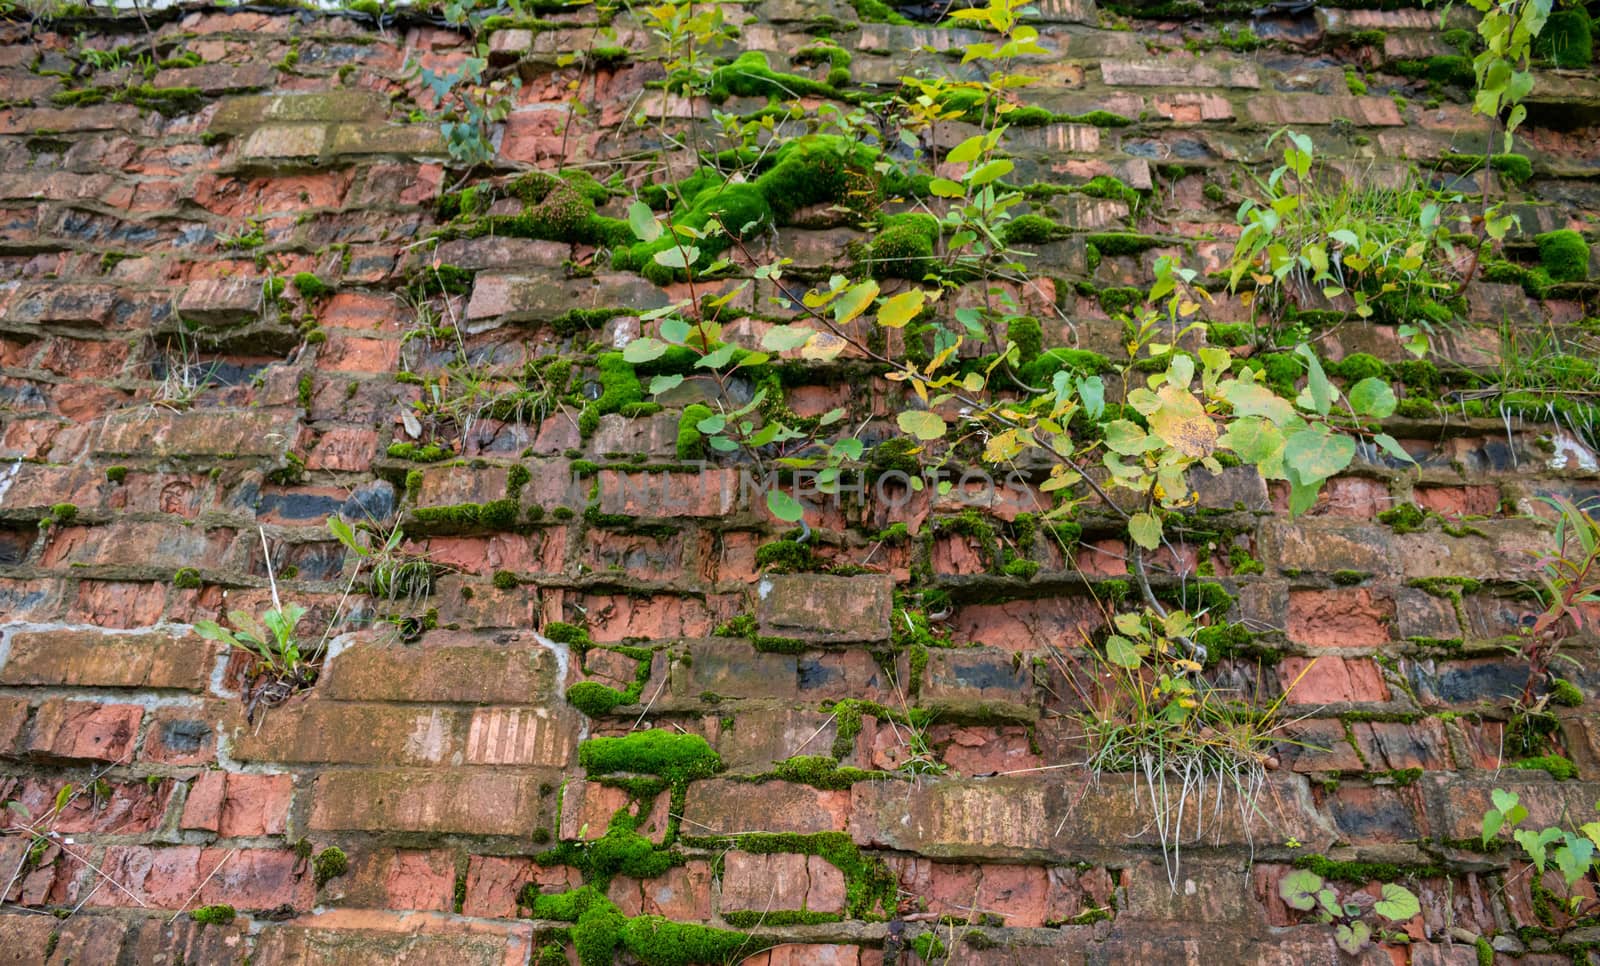 The old ruined brick wall is overgrown with moss and trees.